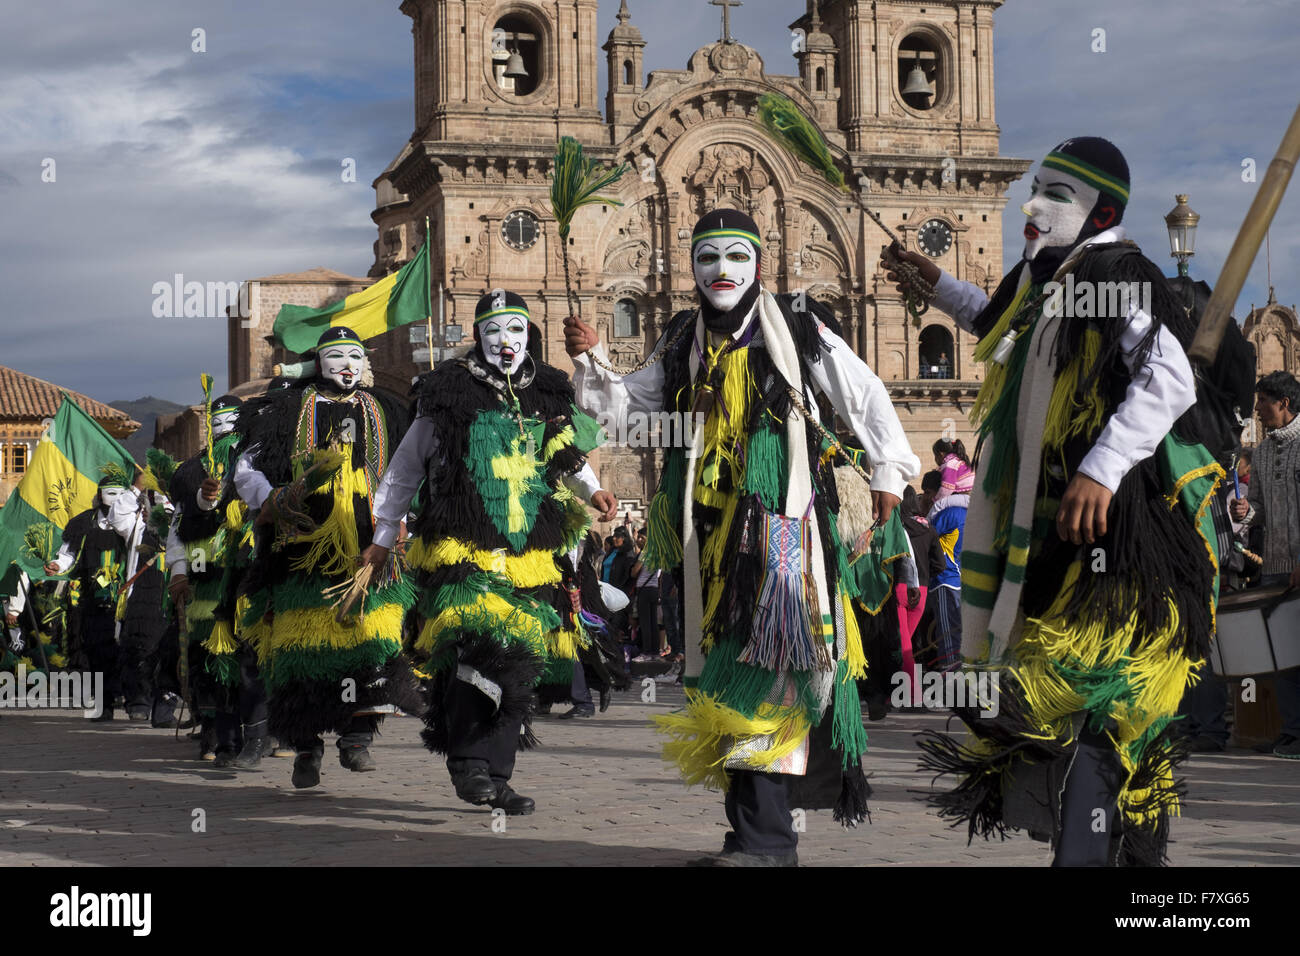 Members of associations participating in the festival of Qoyllur Riti, attend the official launch of the celebration in Cuzco Stock Photo